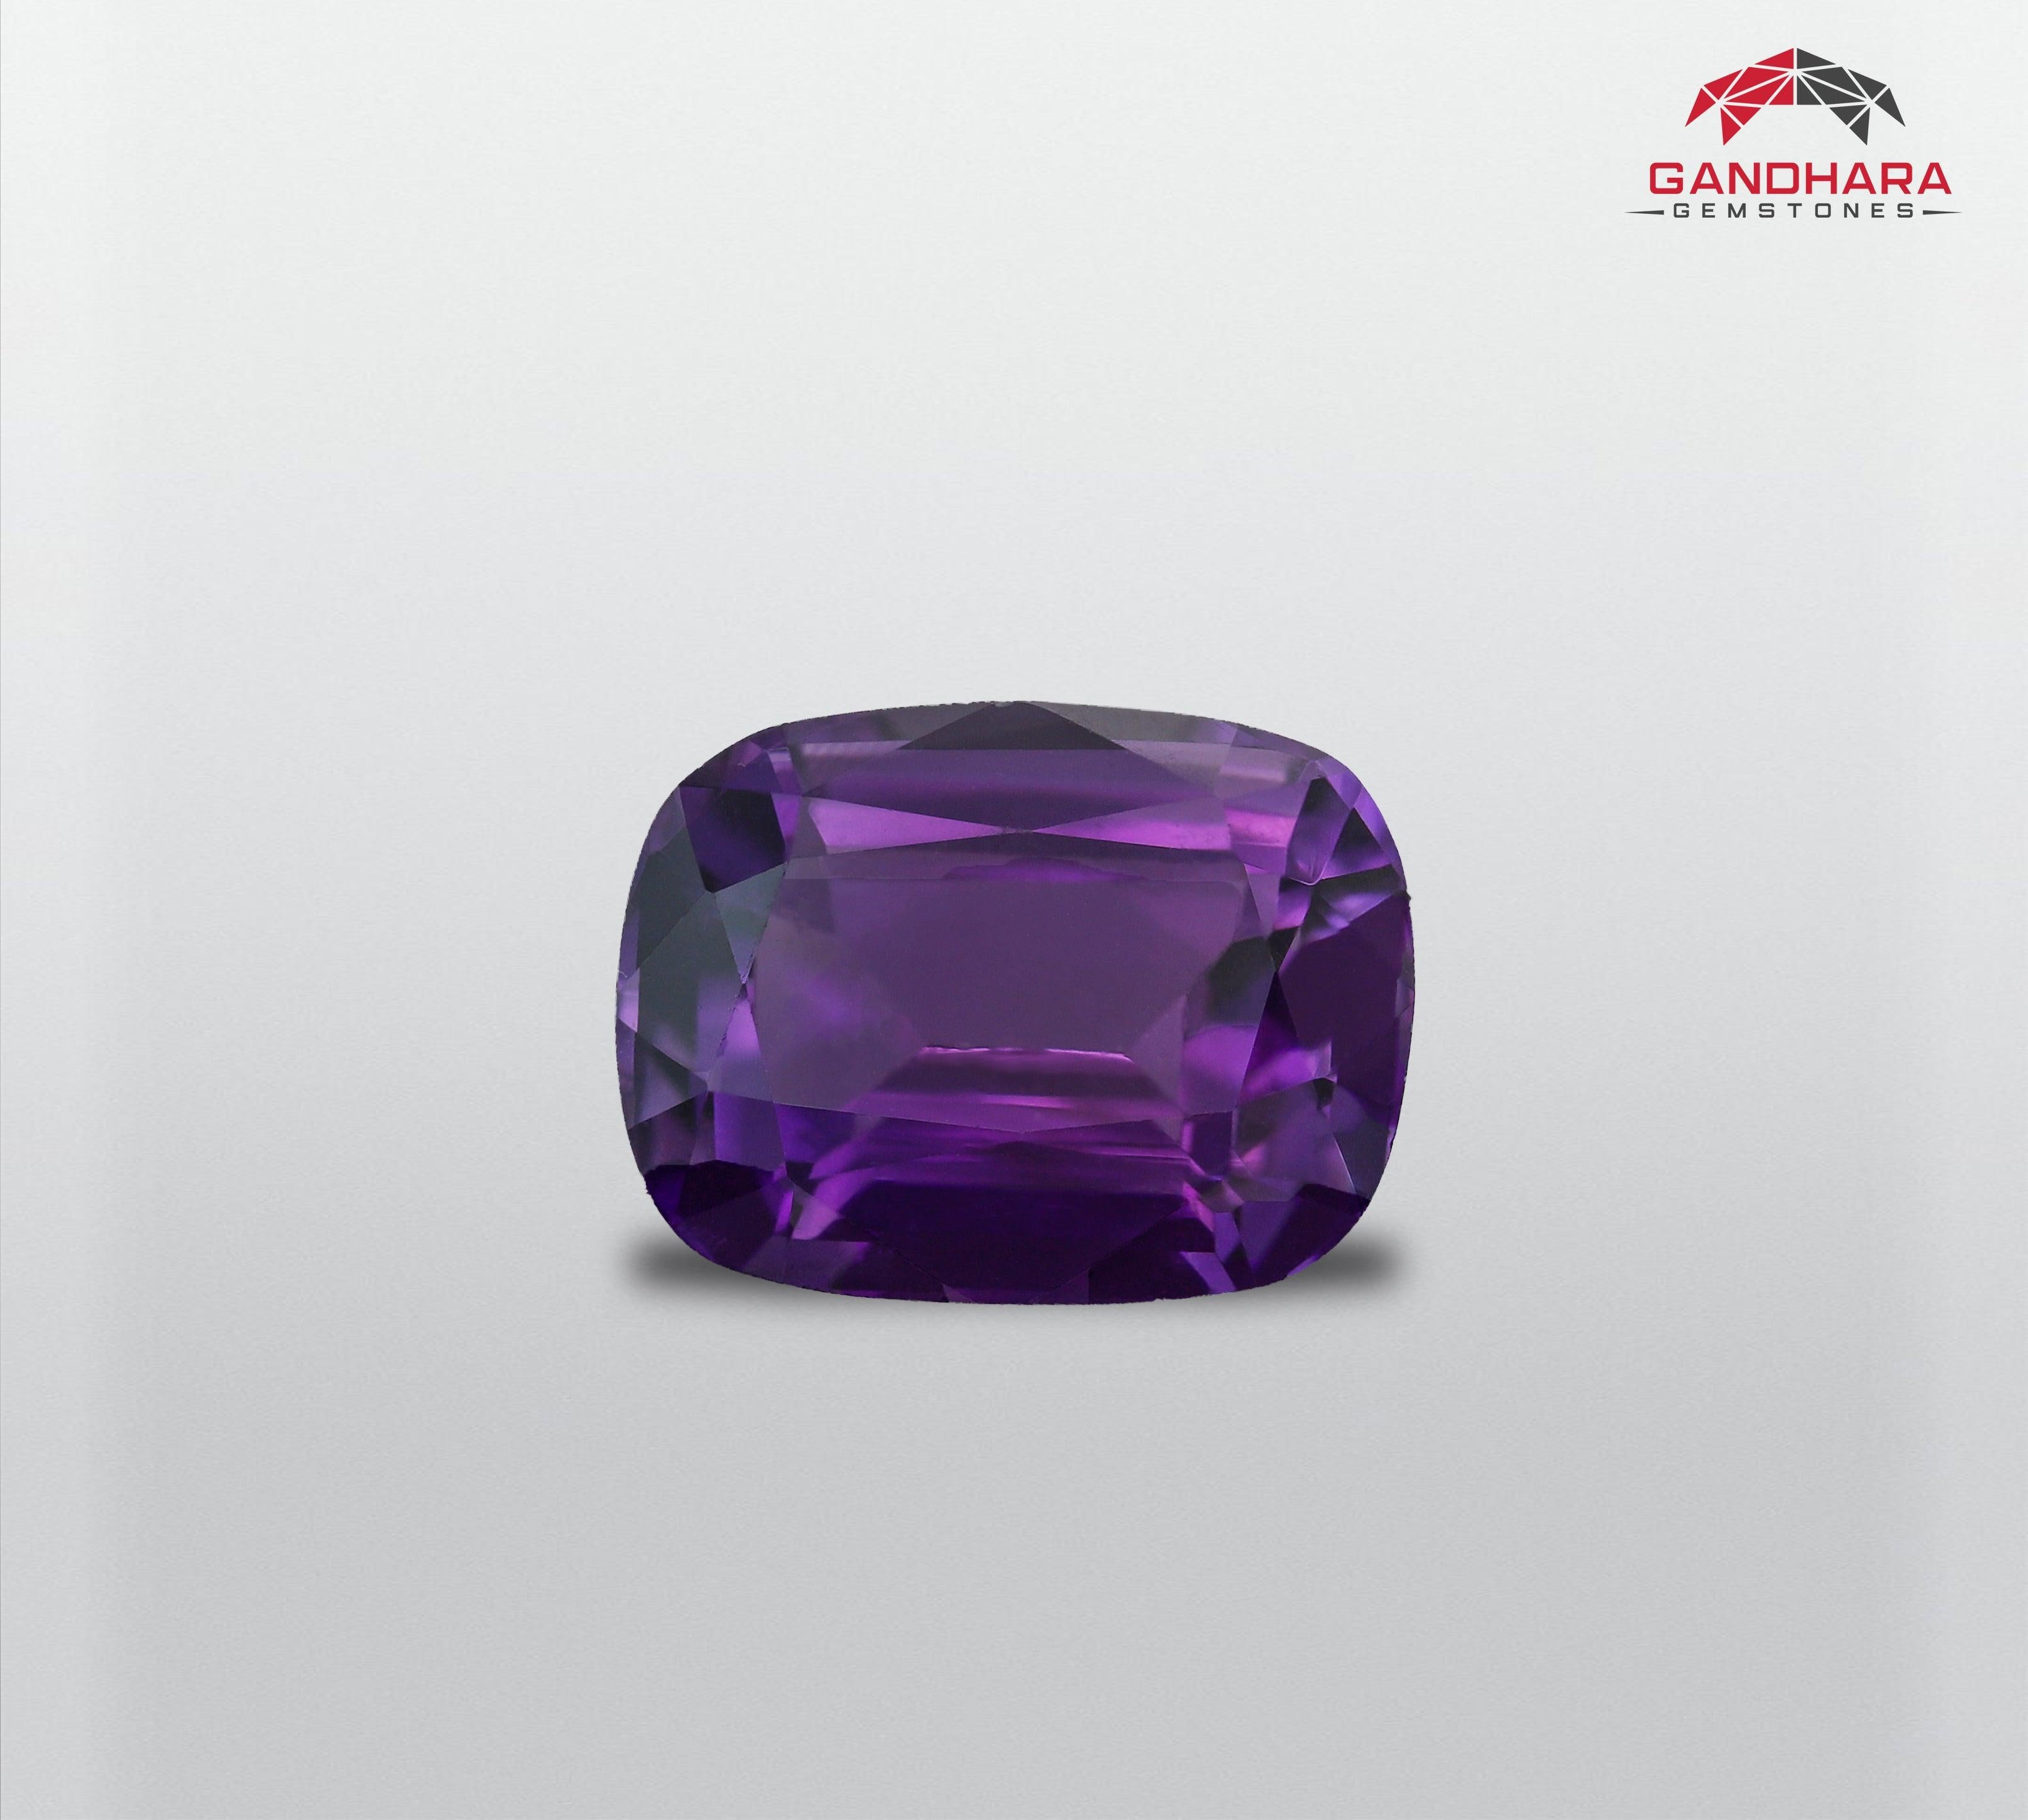 Natural Loose Amethyst Stone, available for sale, natural high quality flawless 5.90 carats, Custom Cushion Cut, certified amethyst from Brazil.

 Product Information:
GEMSTONE TYPE	Natural Loose Amethyst Stone
WEIGHT	5.90 carats
DIMENSIONS	12.9 x